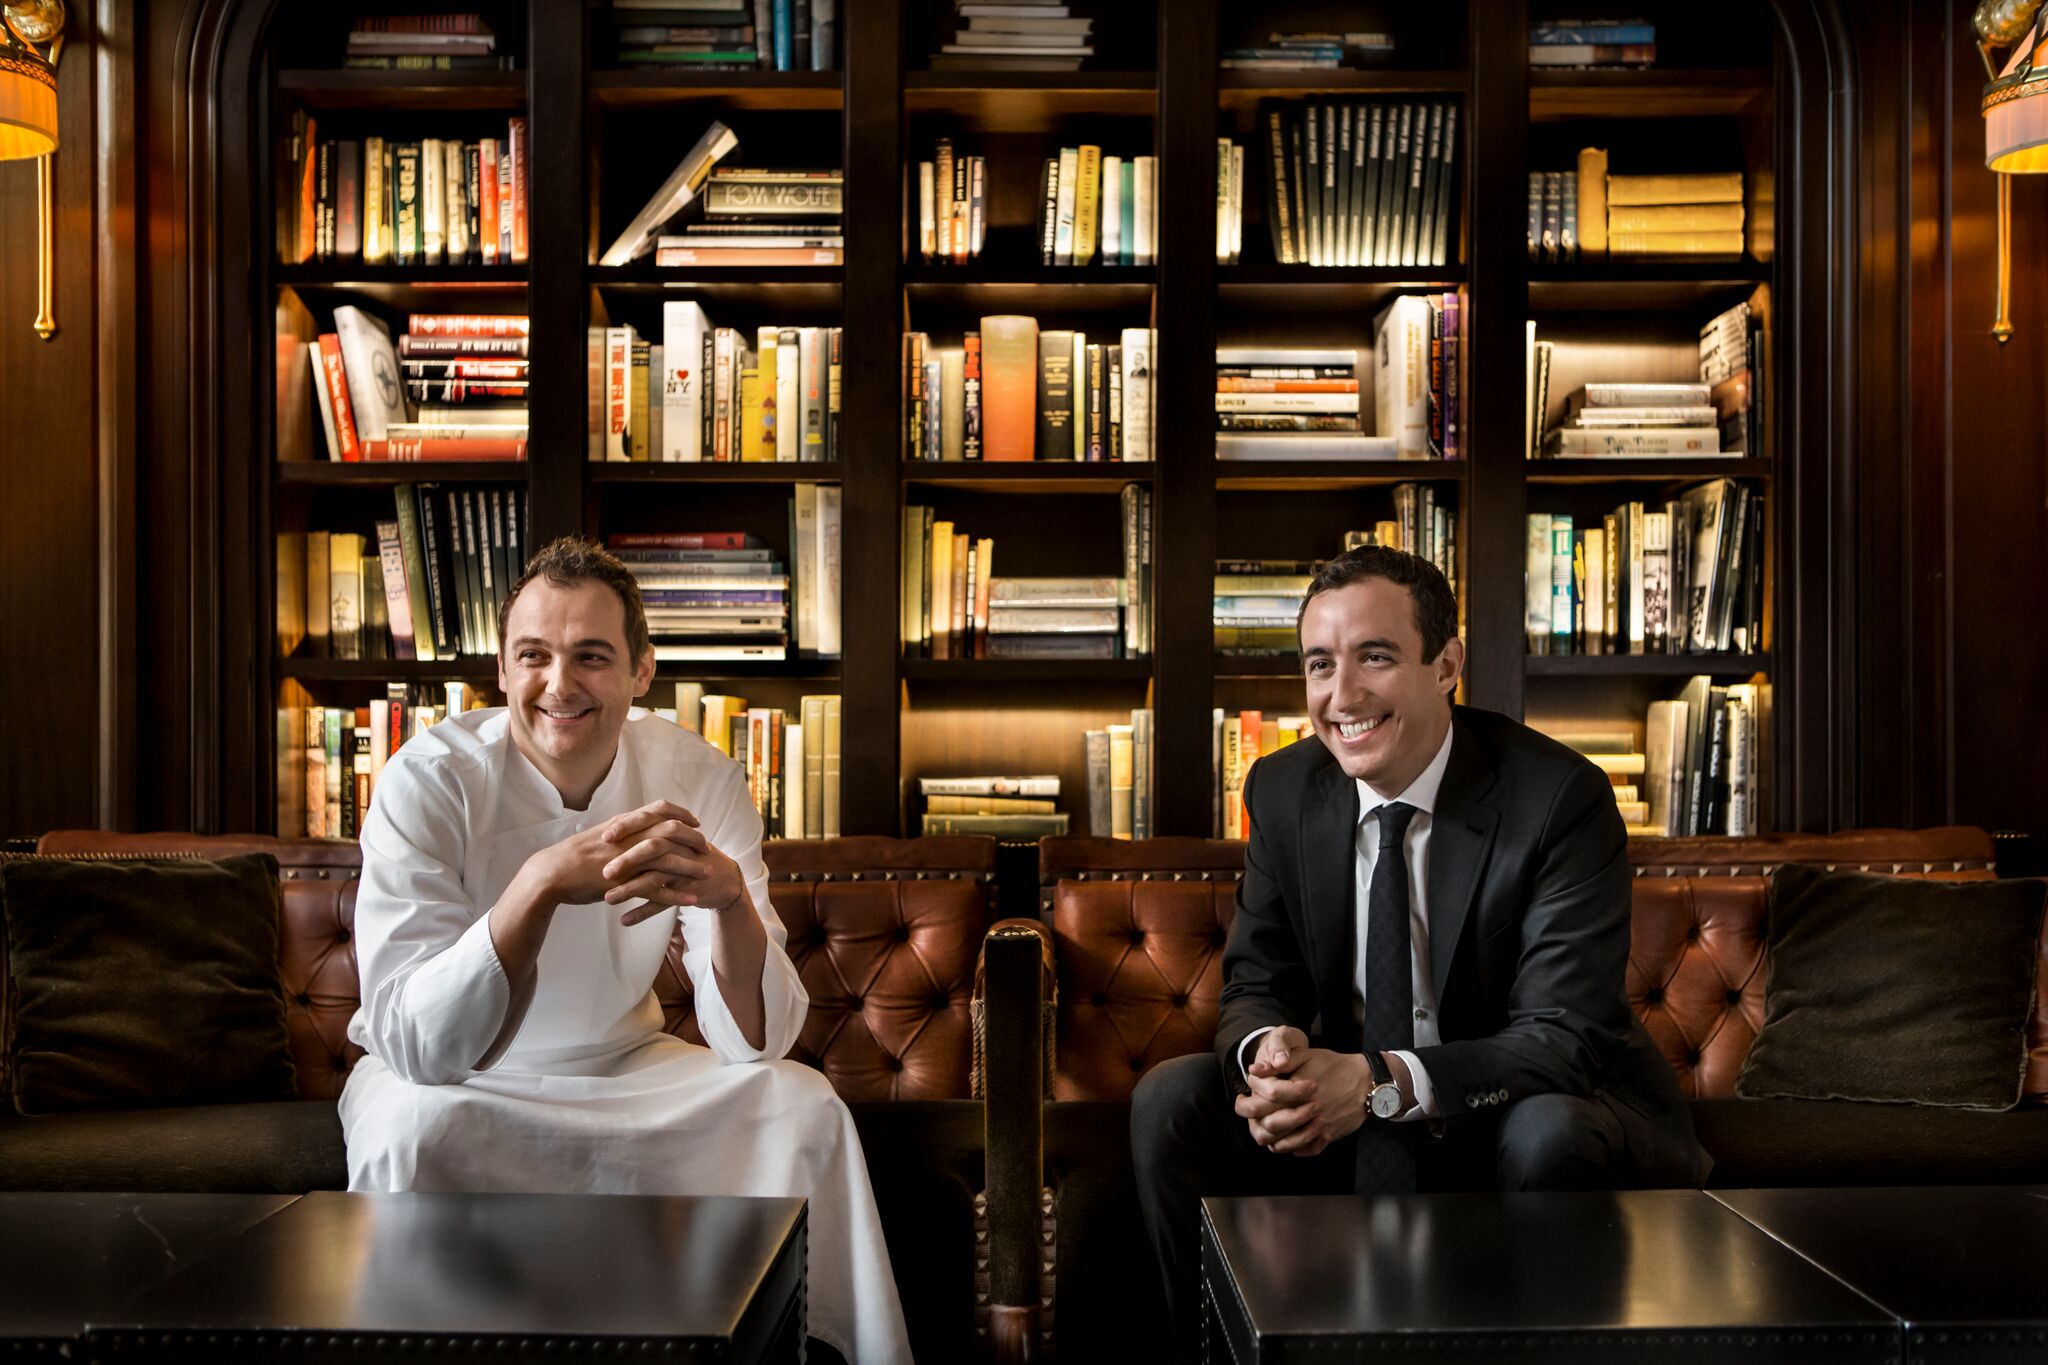 Chef Daniel Humm and Will Guidara in the Library at The NoMad Francesco Tonelli preview